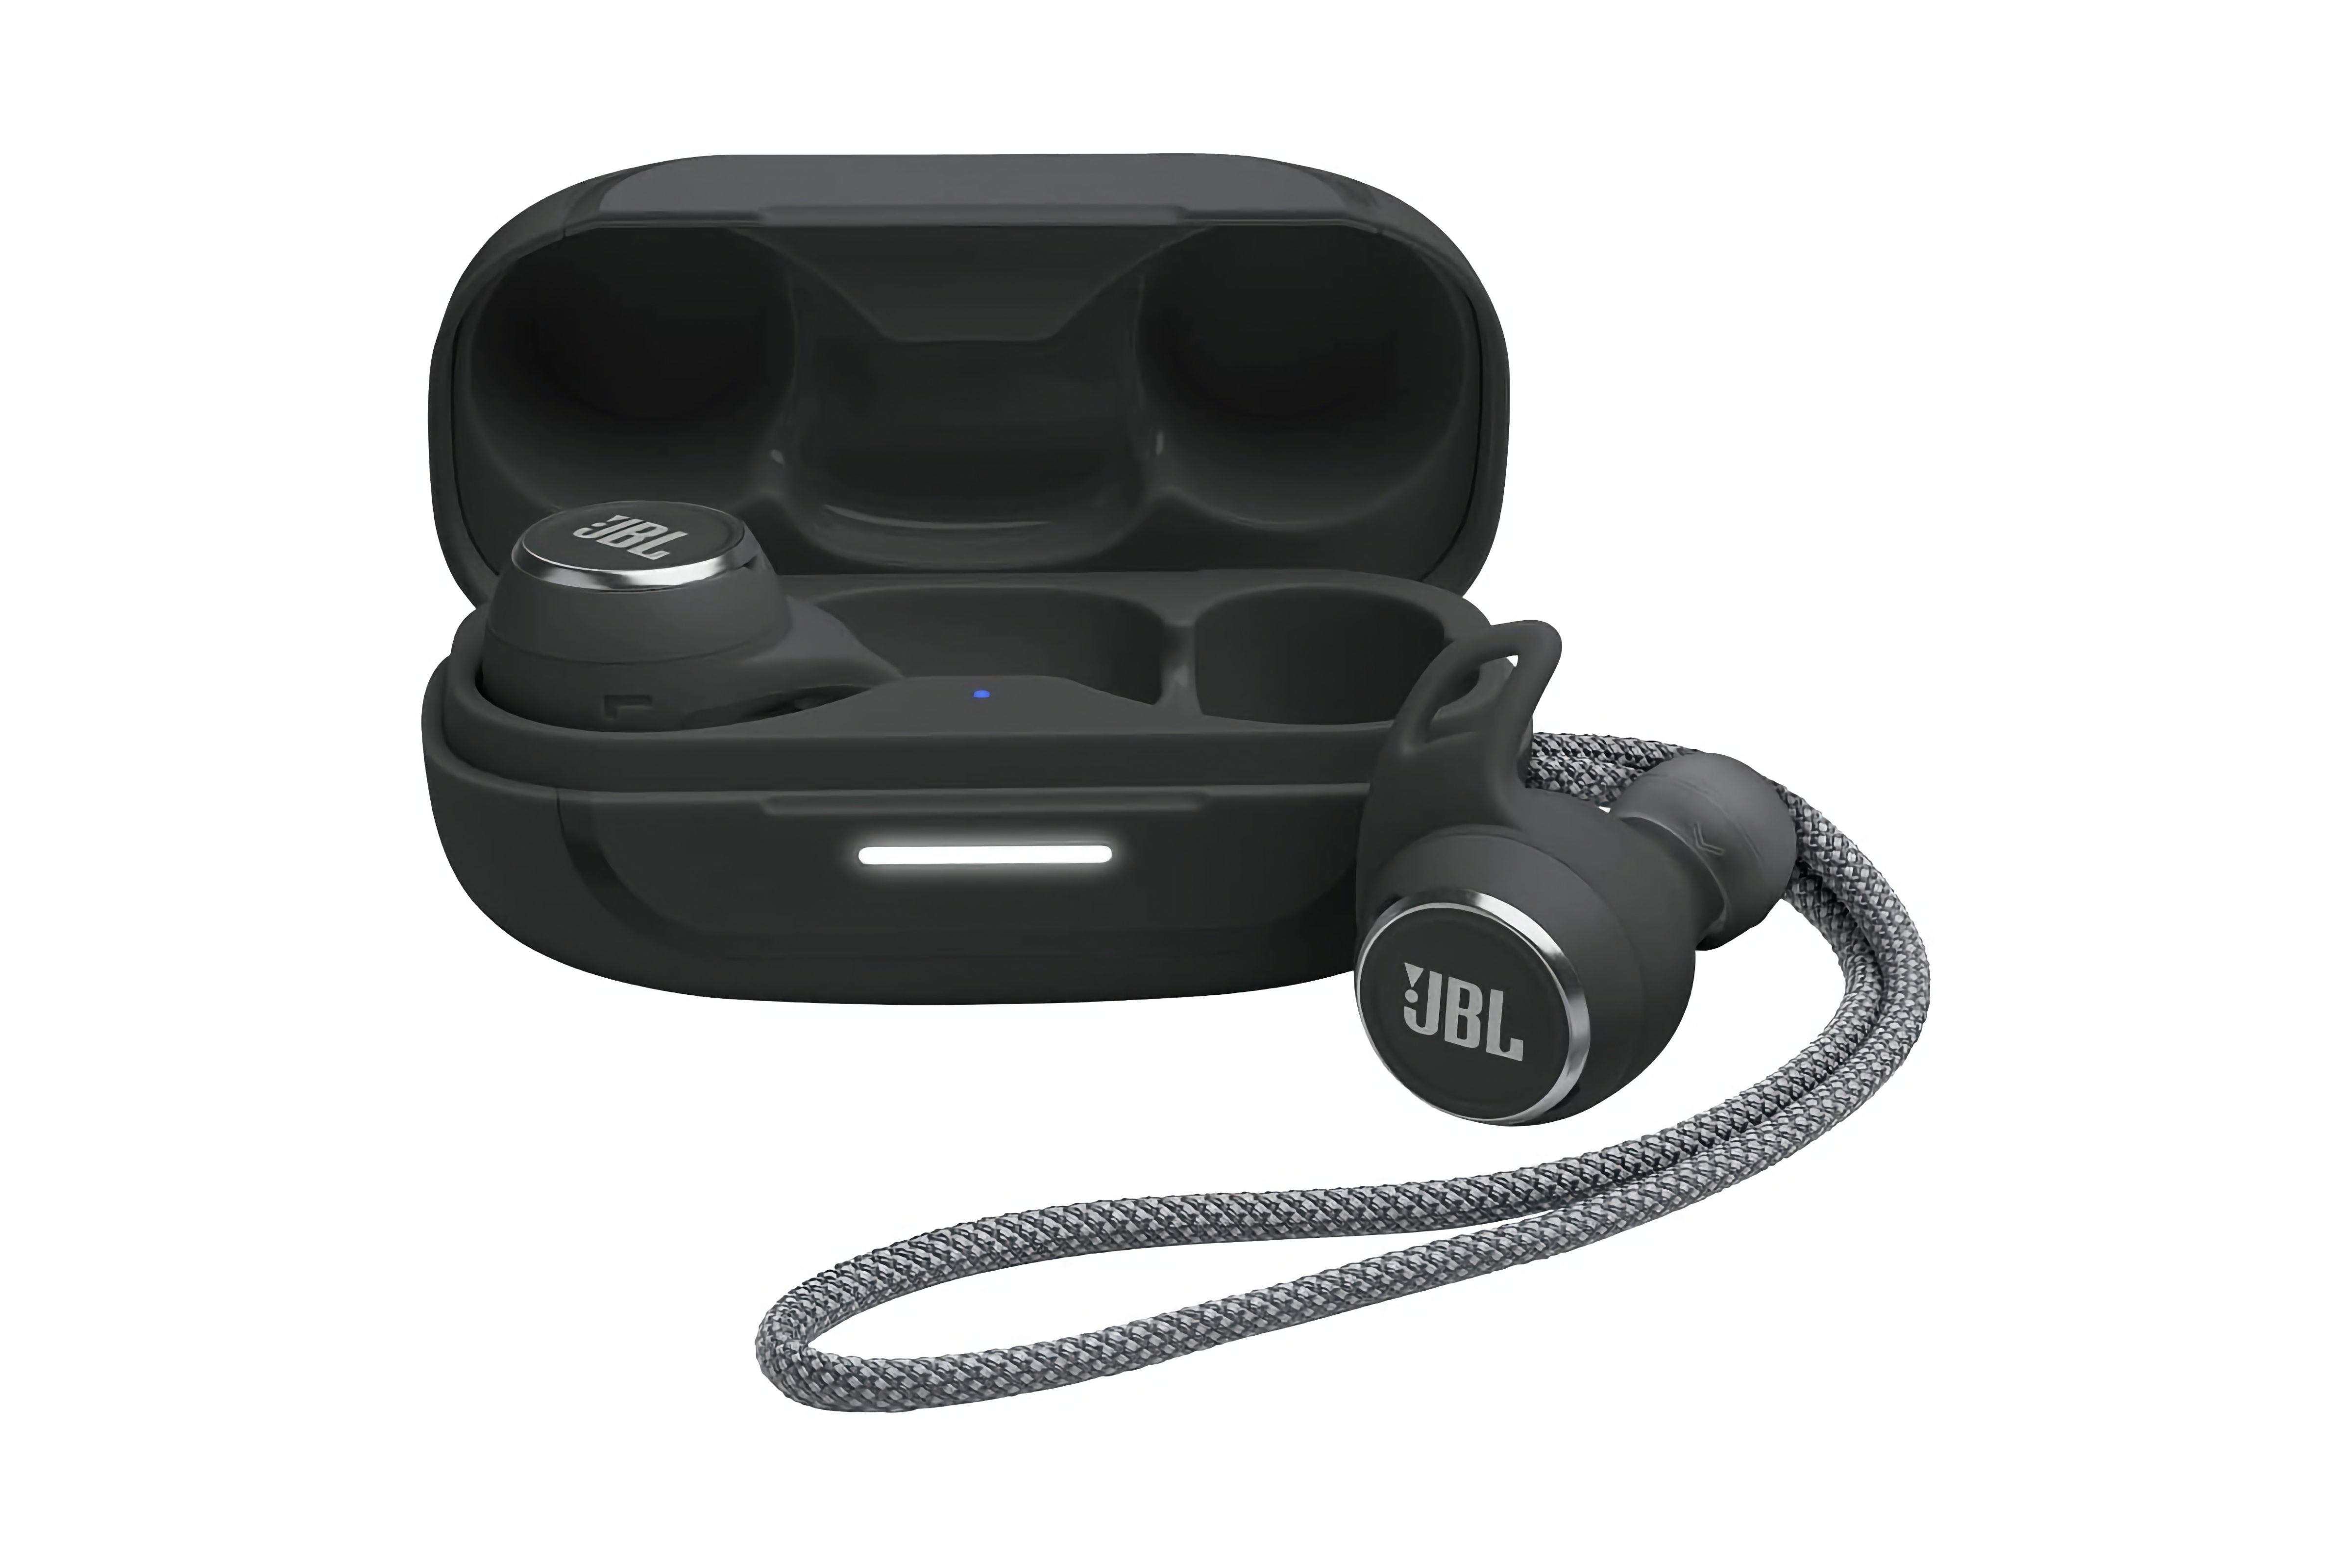 Black, winged wireless earbuds sitting in a charging case, with 